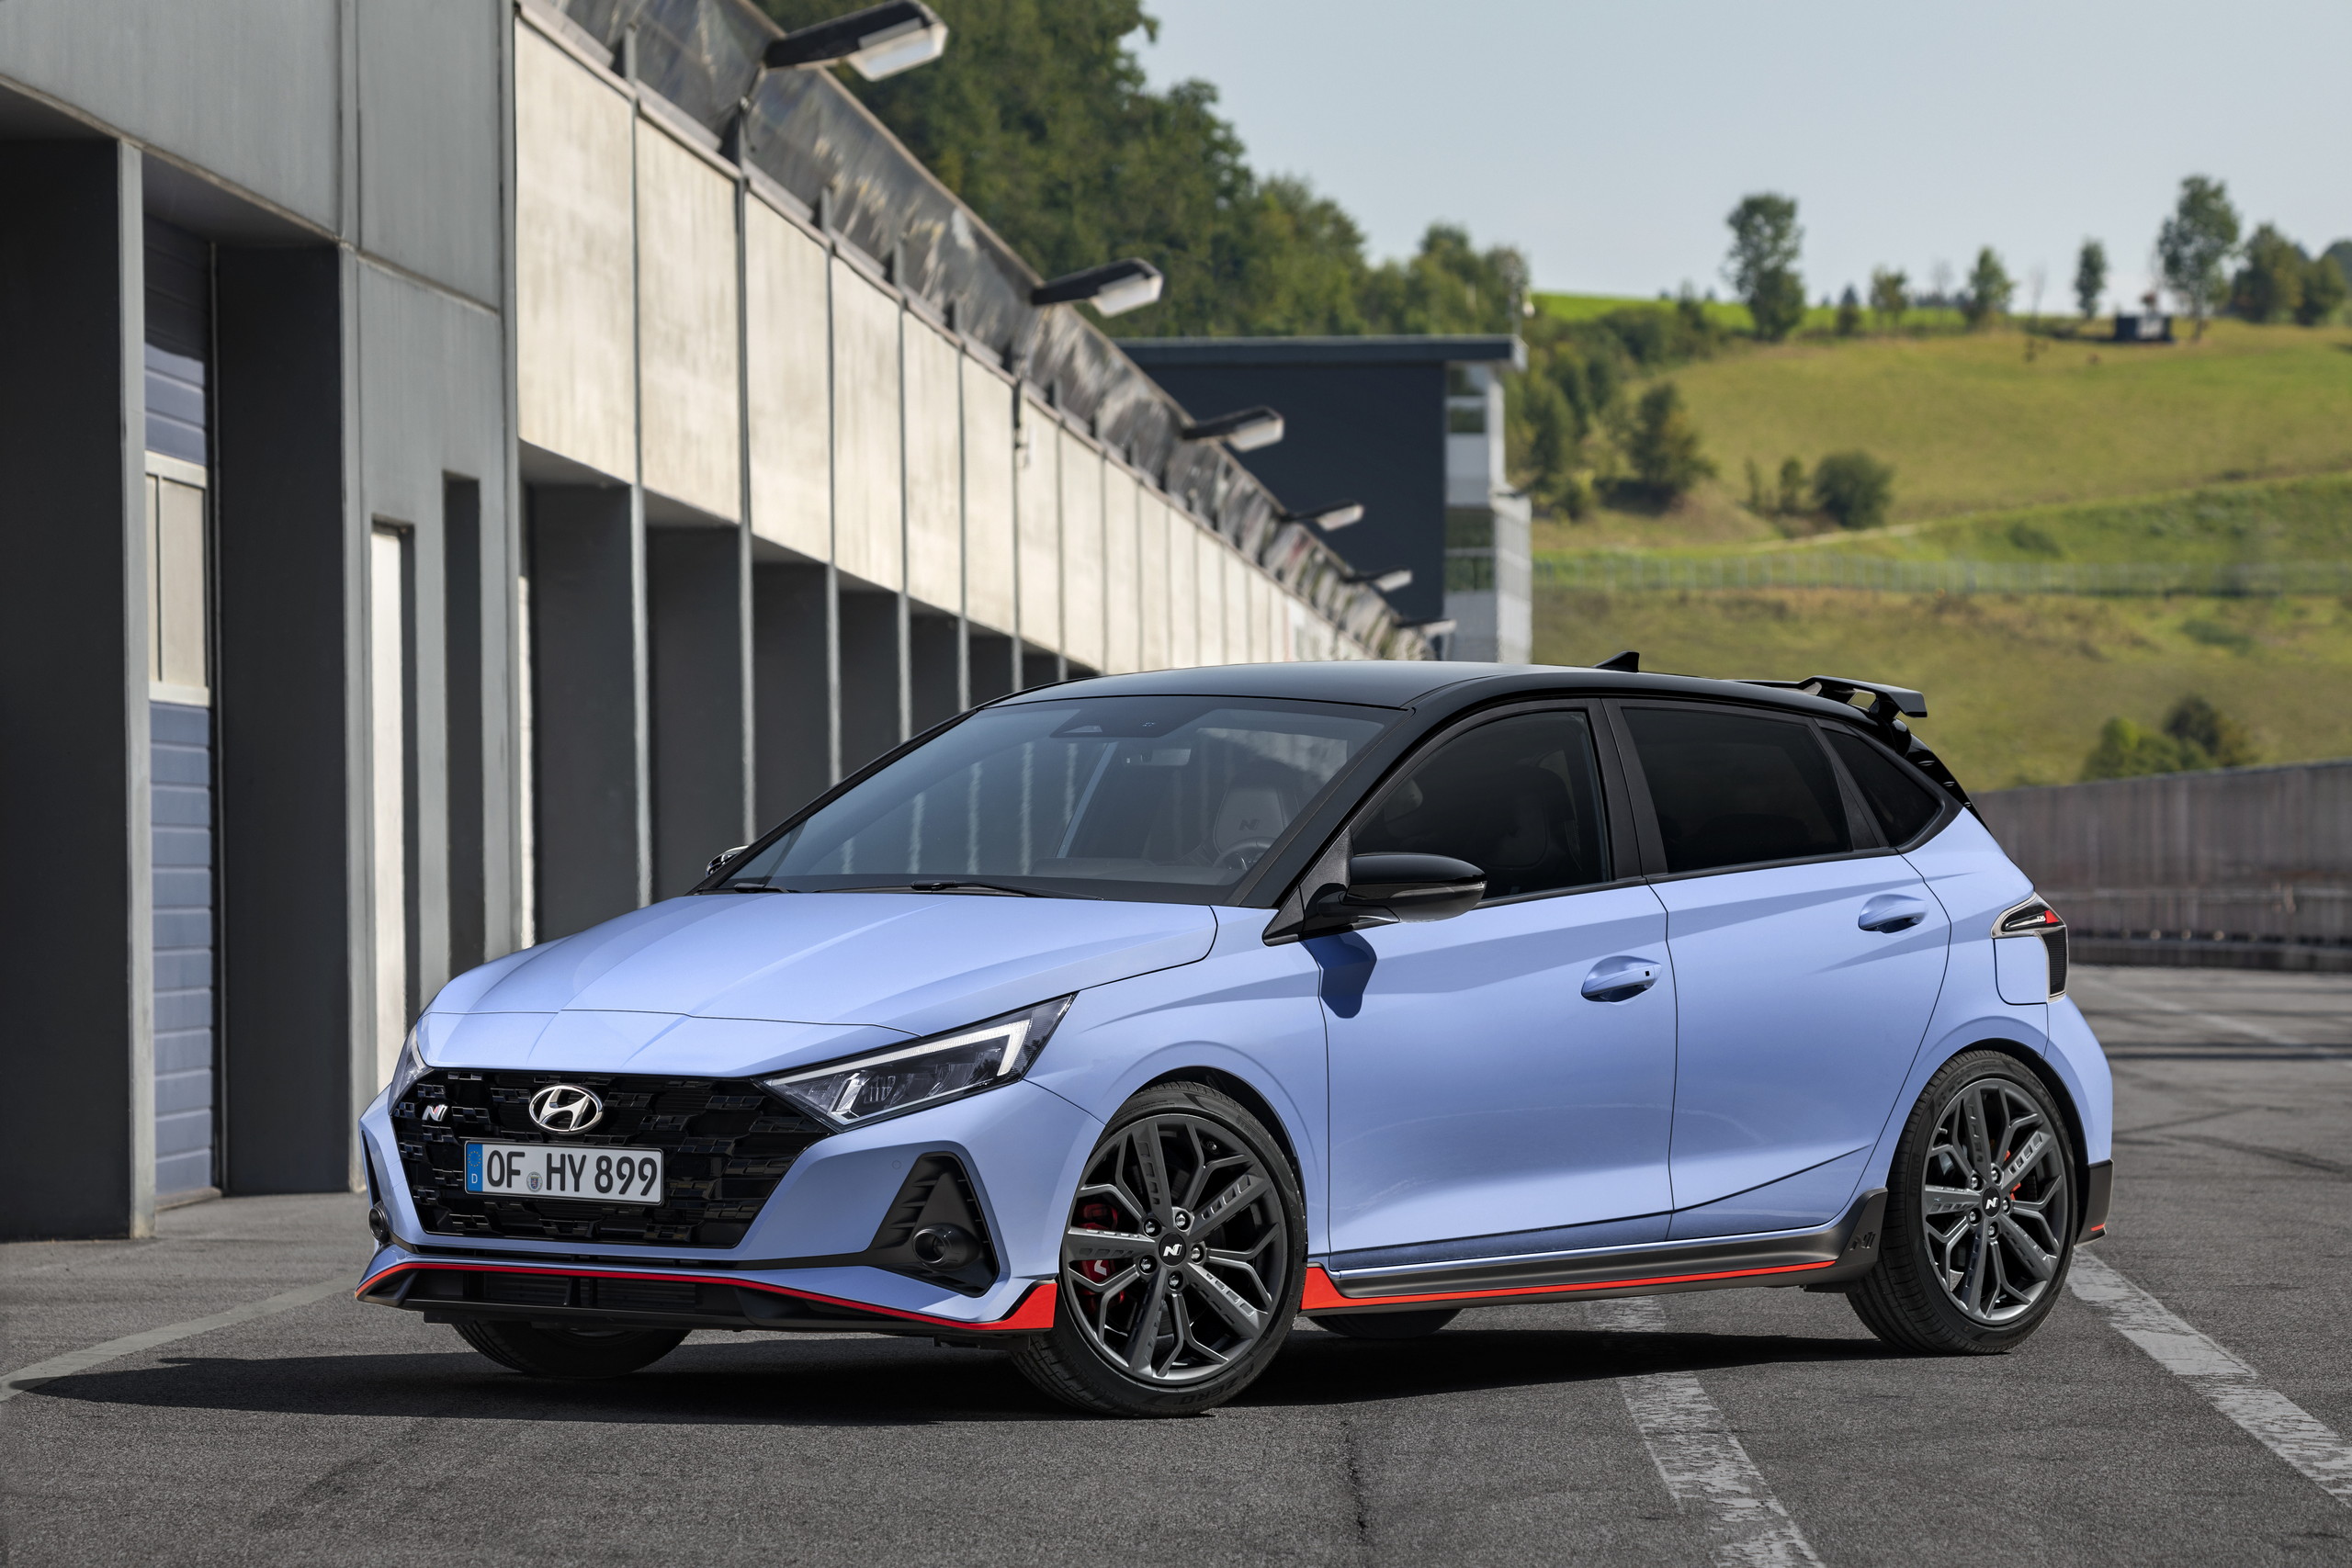 https://s1.cdn.autoevolution.com/images/news/germanys-2021-hyundai-i20-n-is-nicely-specced-costs-more-than-fords-fiesta-st-163335_1.jpg